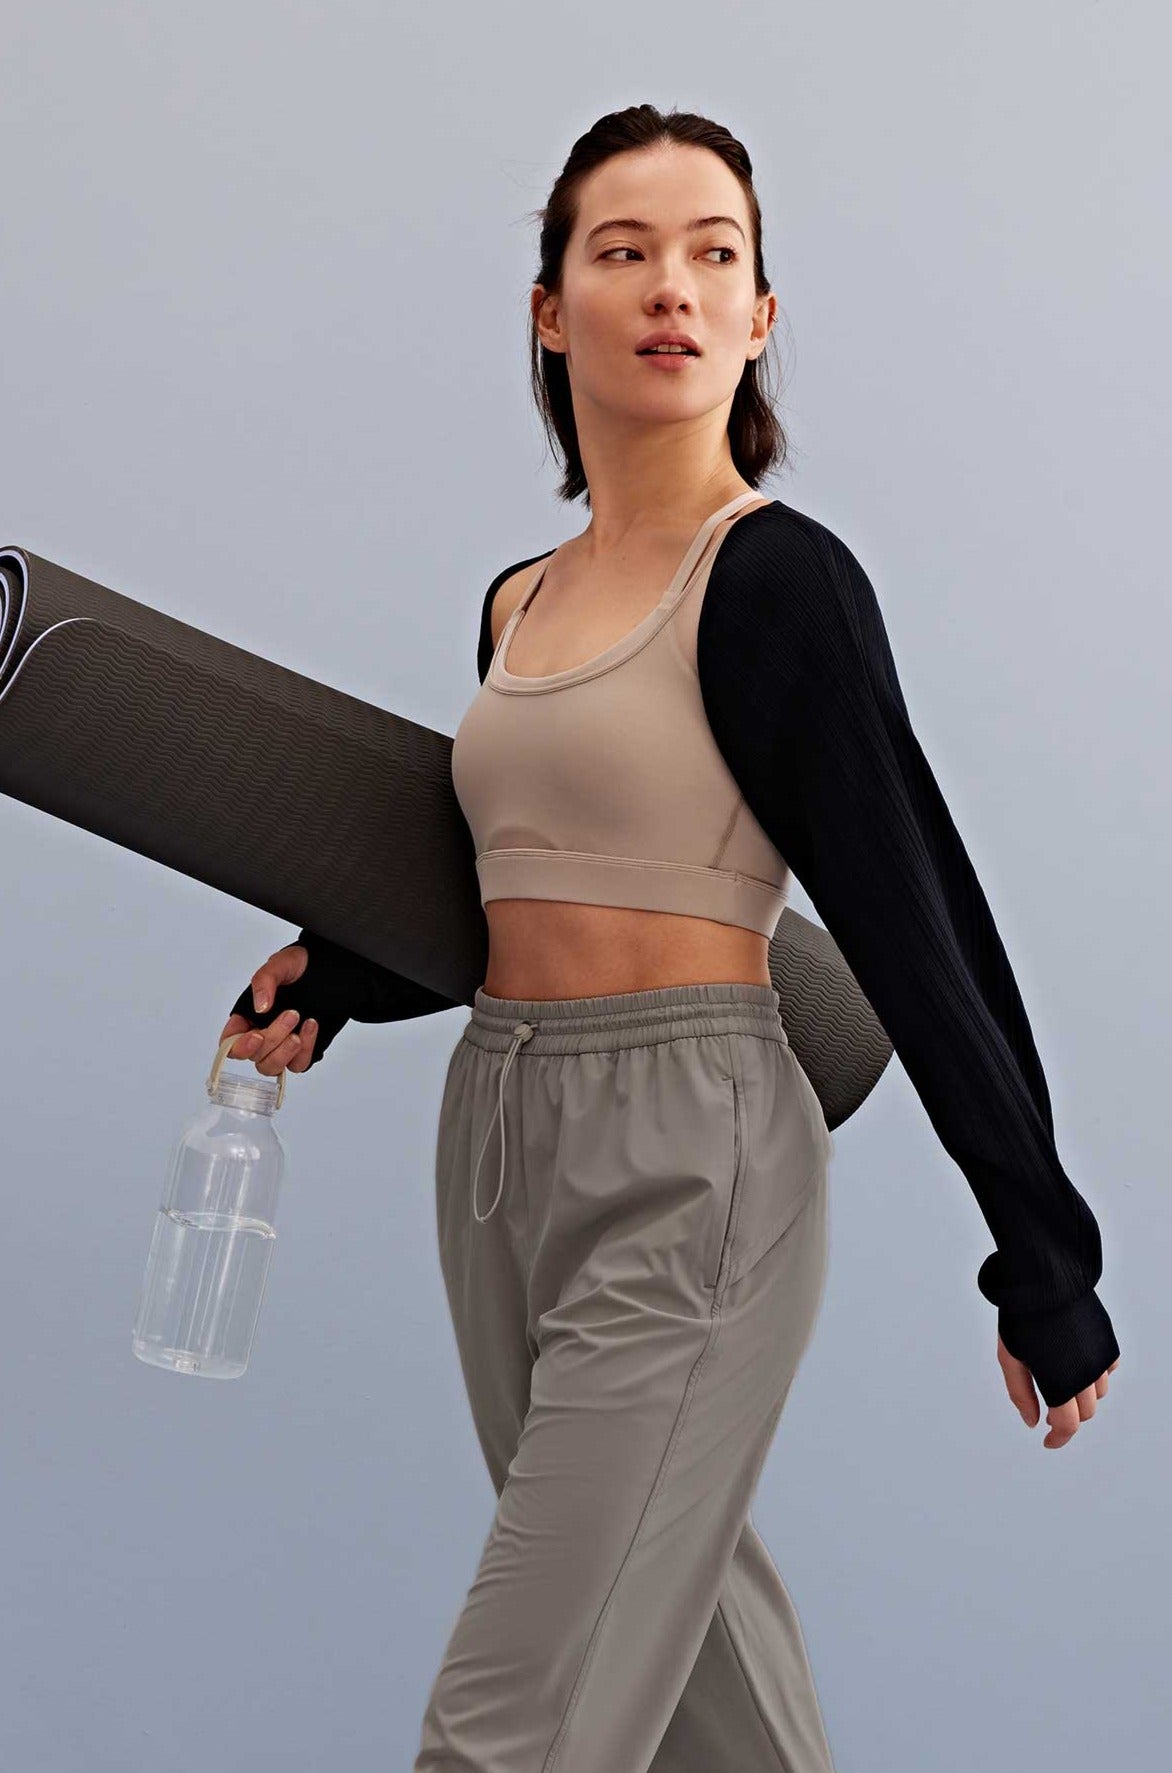 a woman holding a water bottle and yoga mat walking, with a light grey sports bra, black shrug and grey pants. 